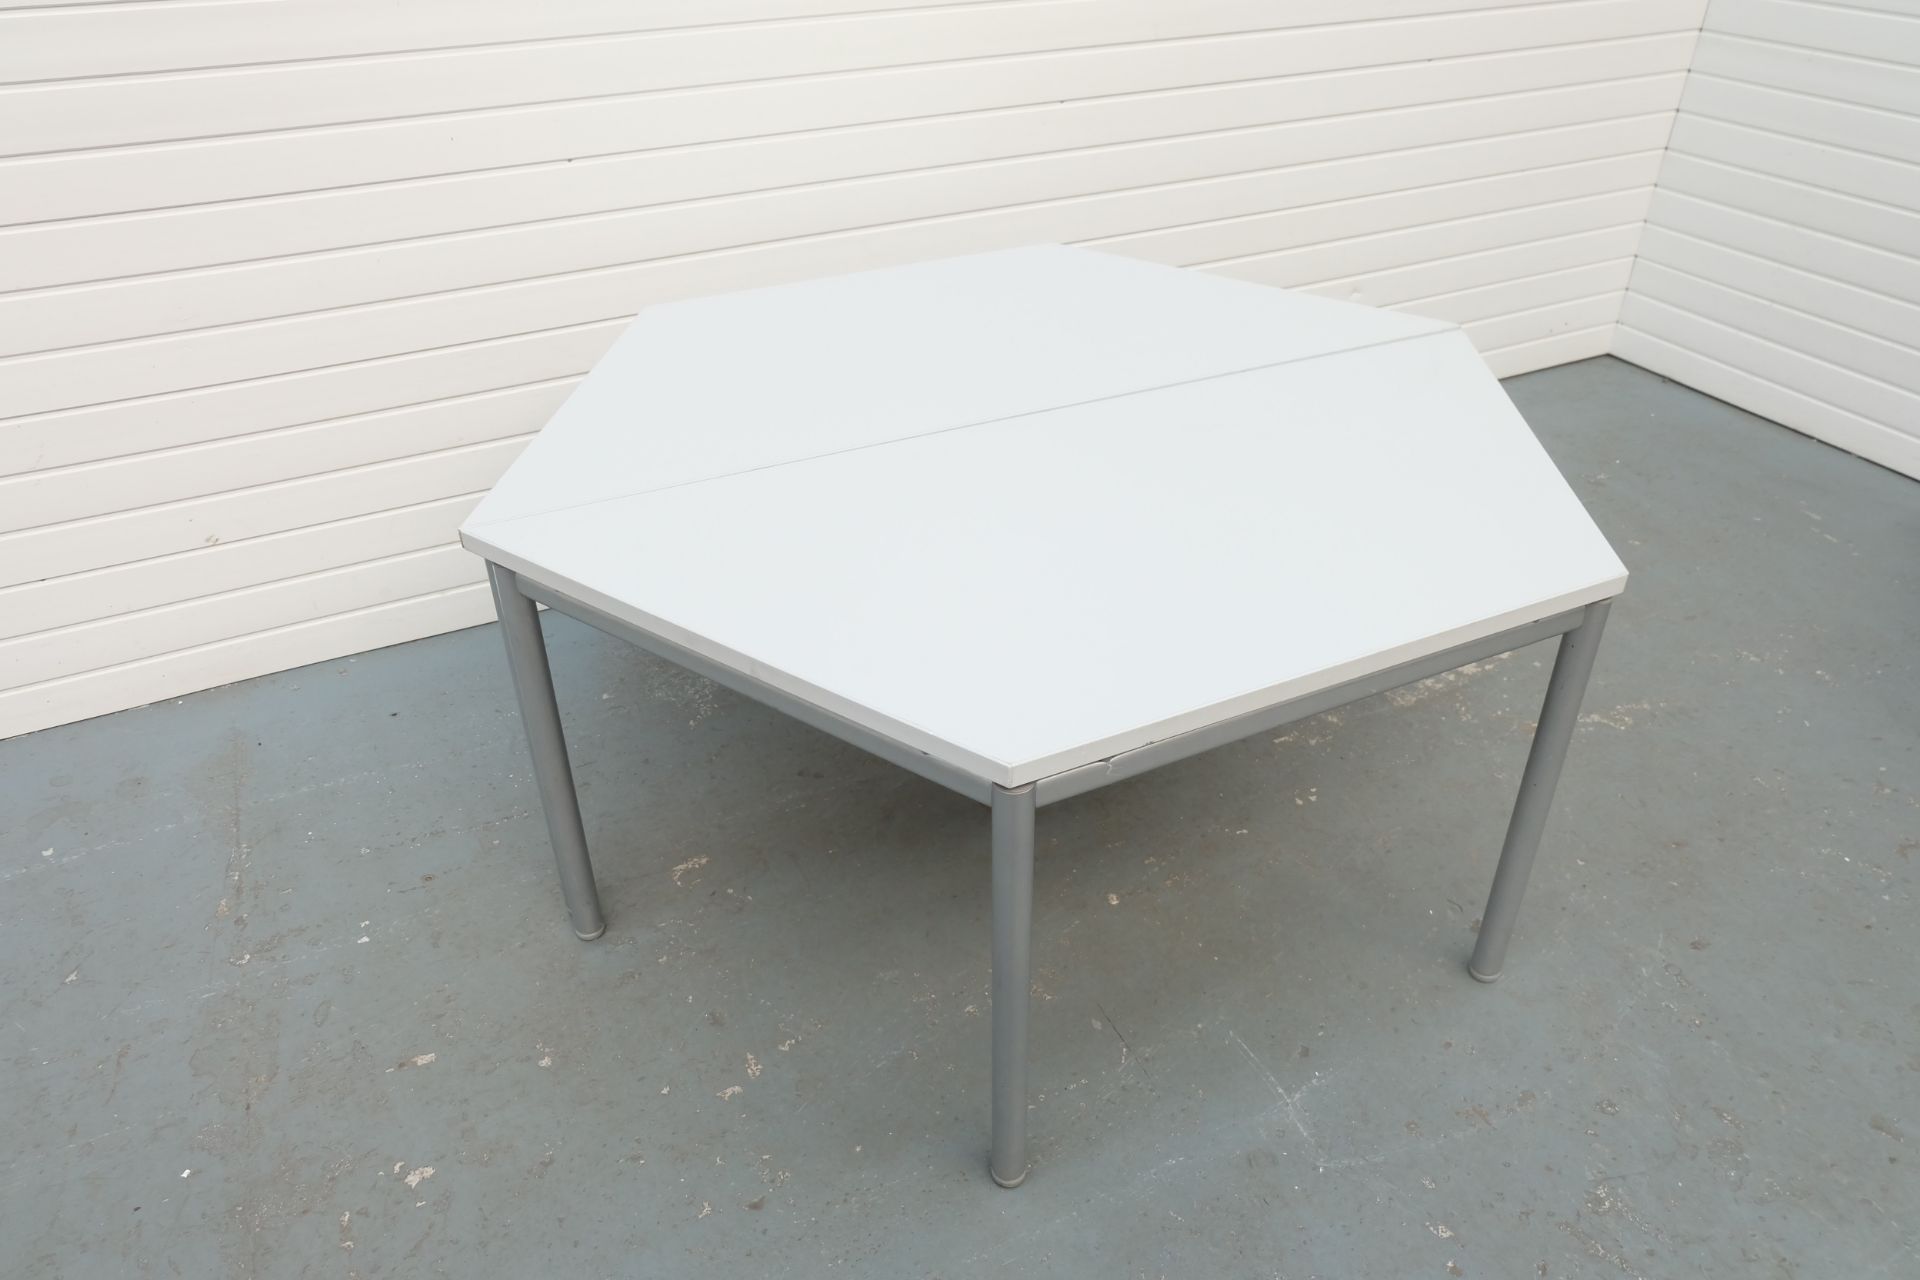 Two Part Hexagonal Table With Adjustable Feet. Size 1600mmx 690mm x 680mm High. - Image 2 of 3